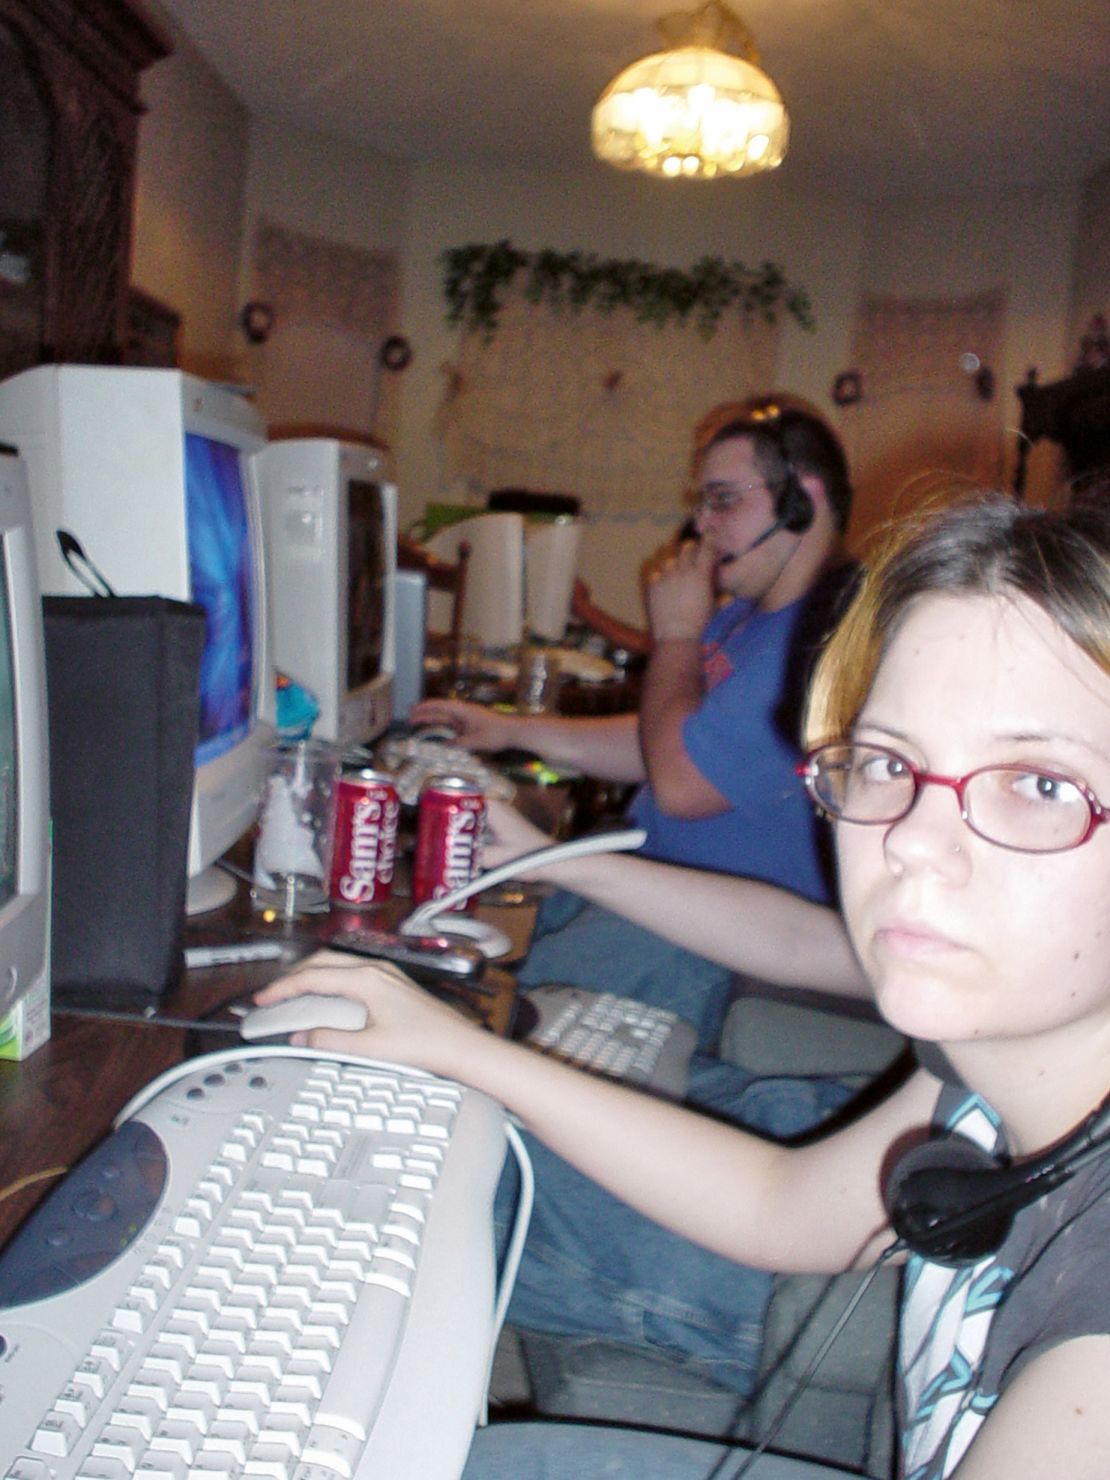 LAN parties made space for competition and community in both 'real life' and online environments simultaneously. Pictured above, gamers in Tulsa, Oklahoma in 2003.